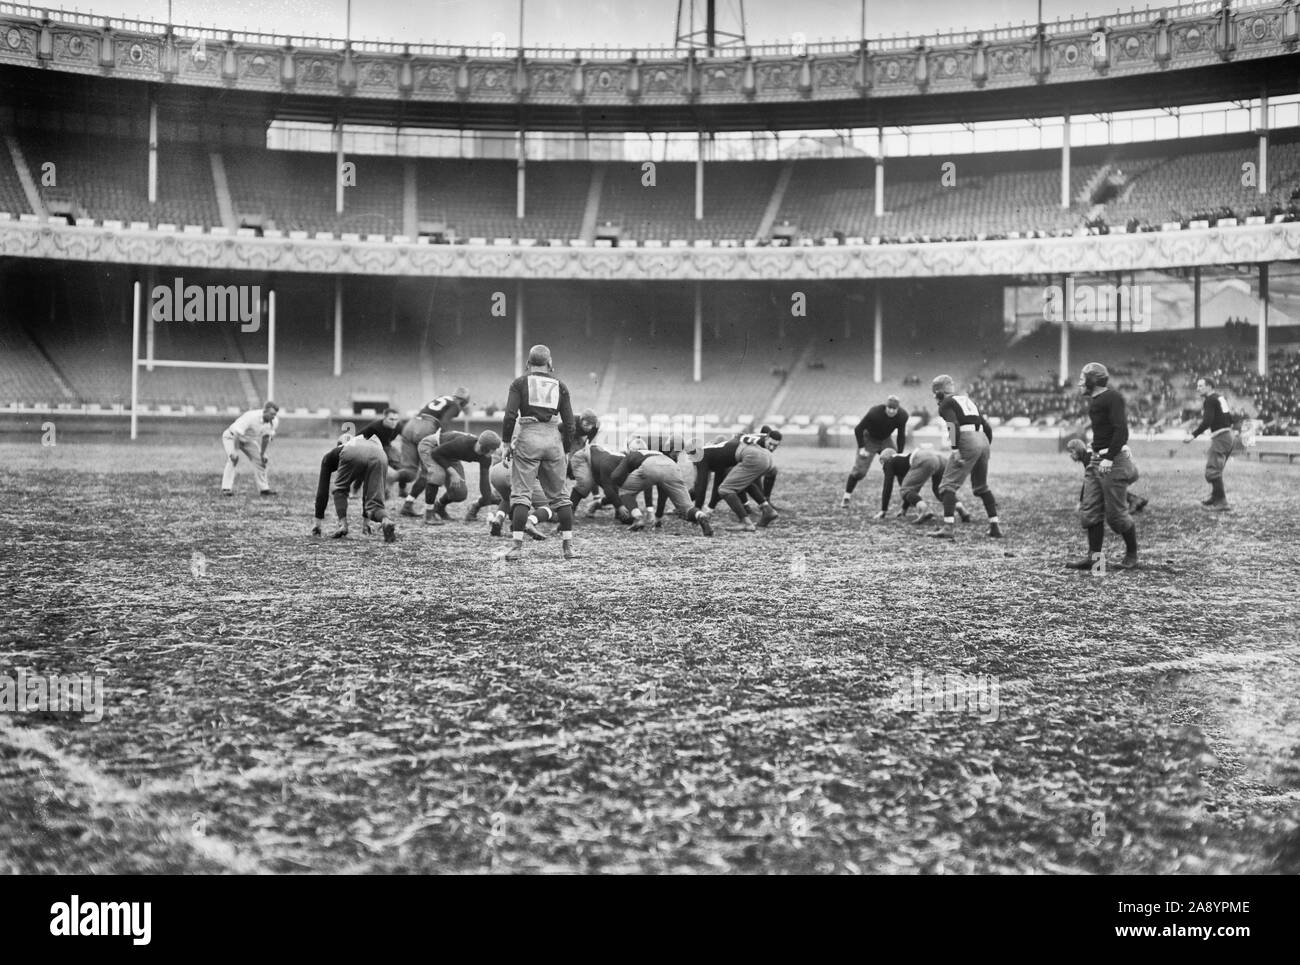 Photograph shows Washington & Jefferson College playing a football game against Rutgers University at the Polo Grounds in New York City on November 28, 1914. Stock Photo